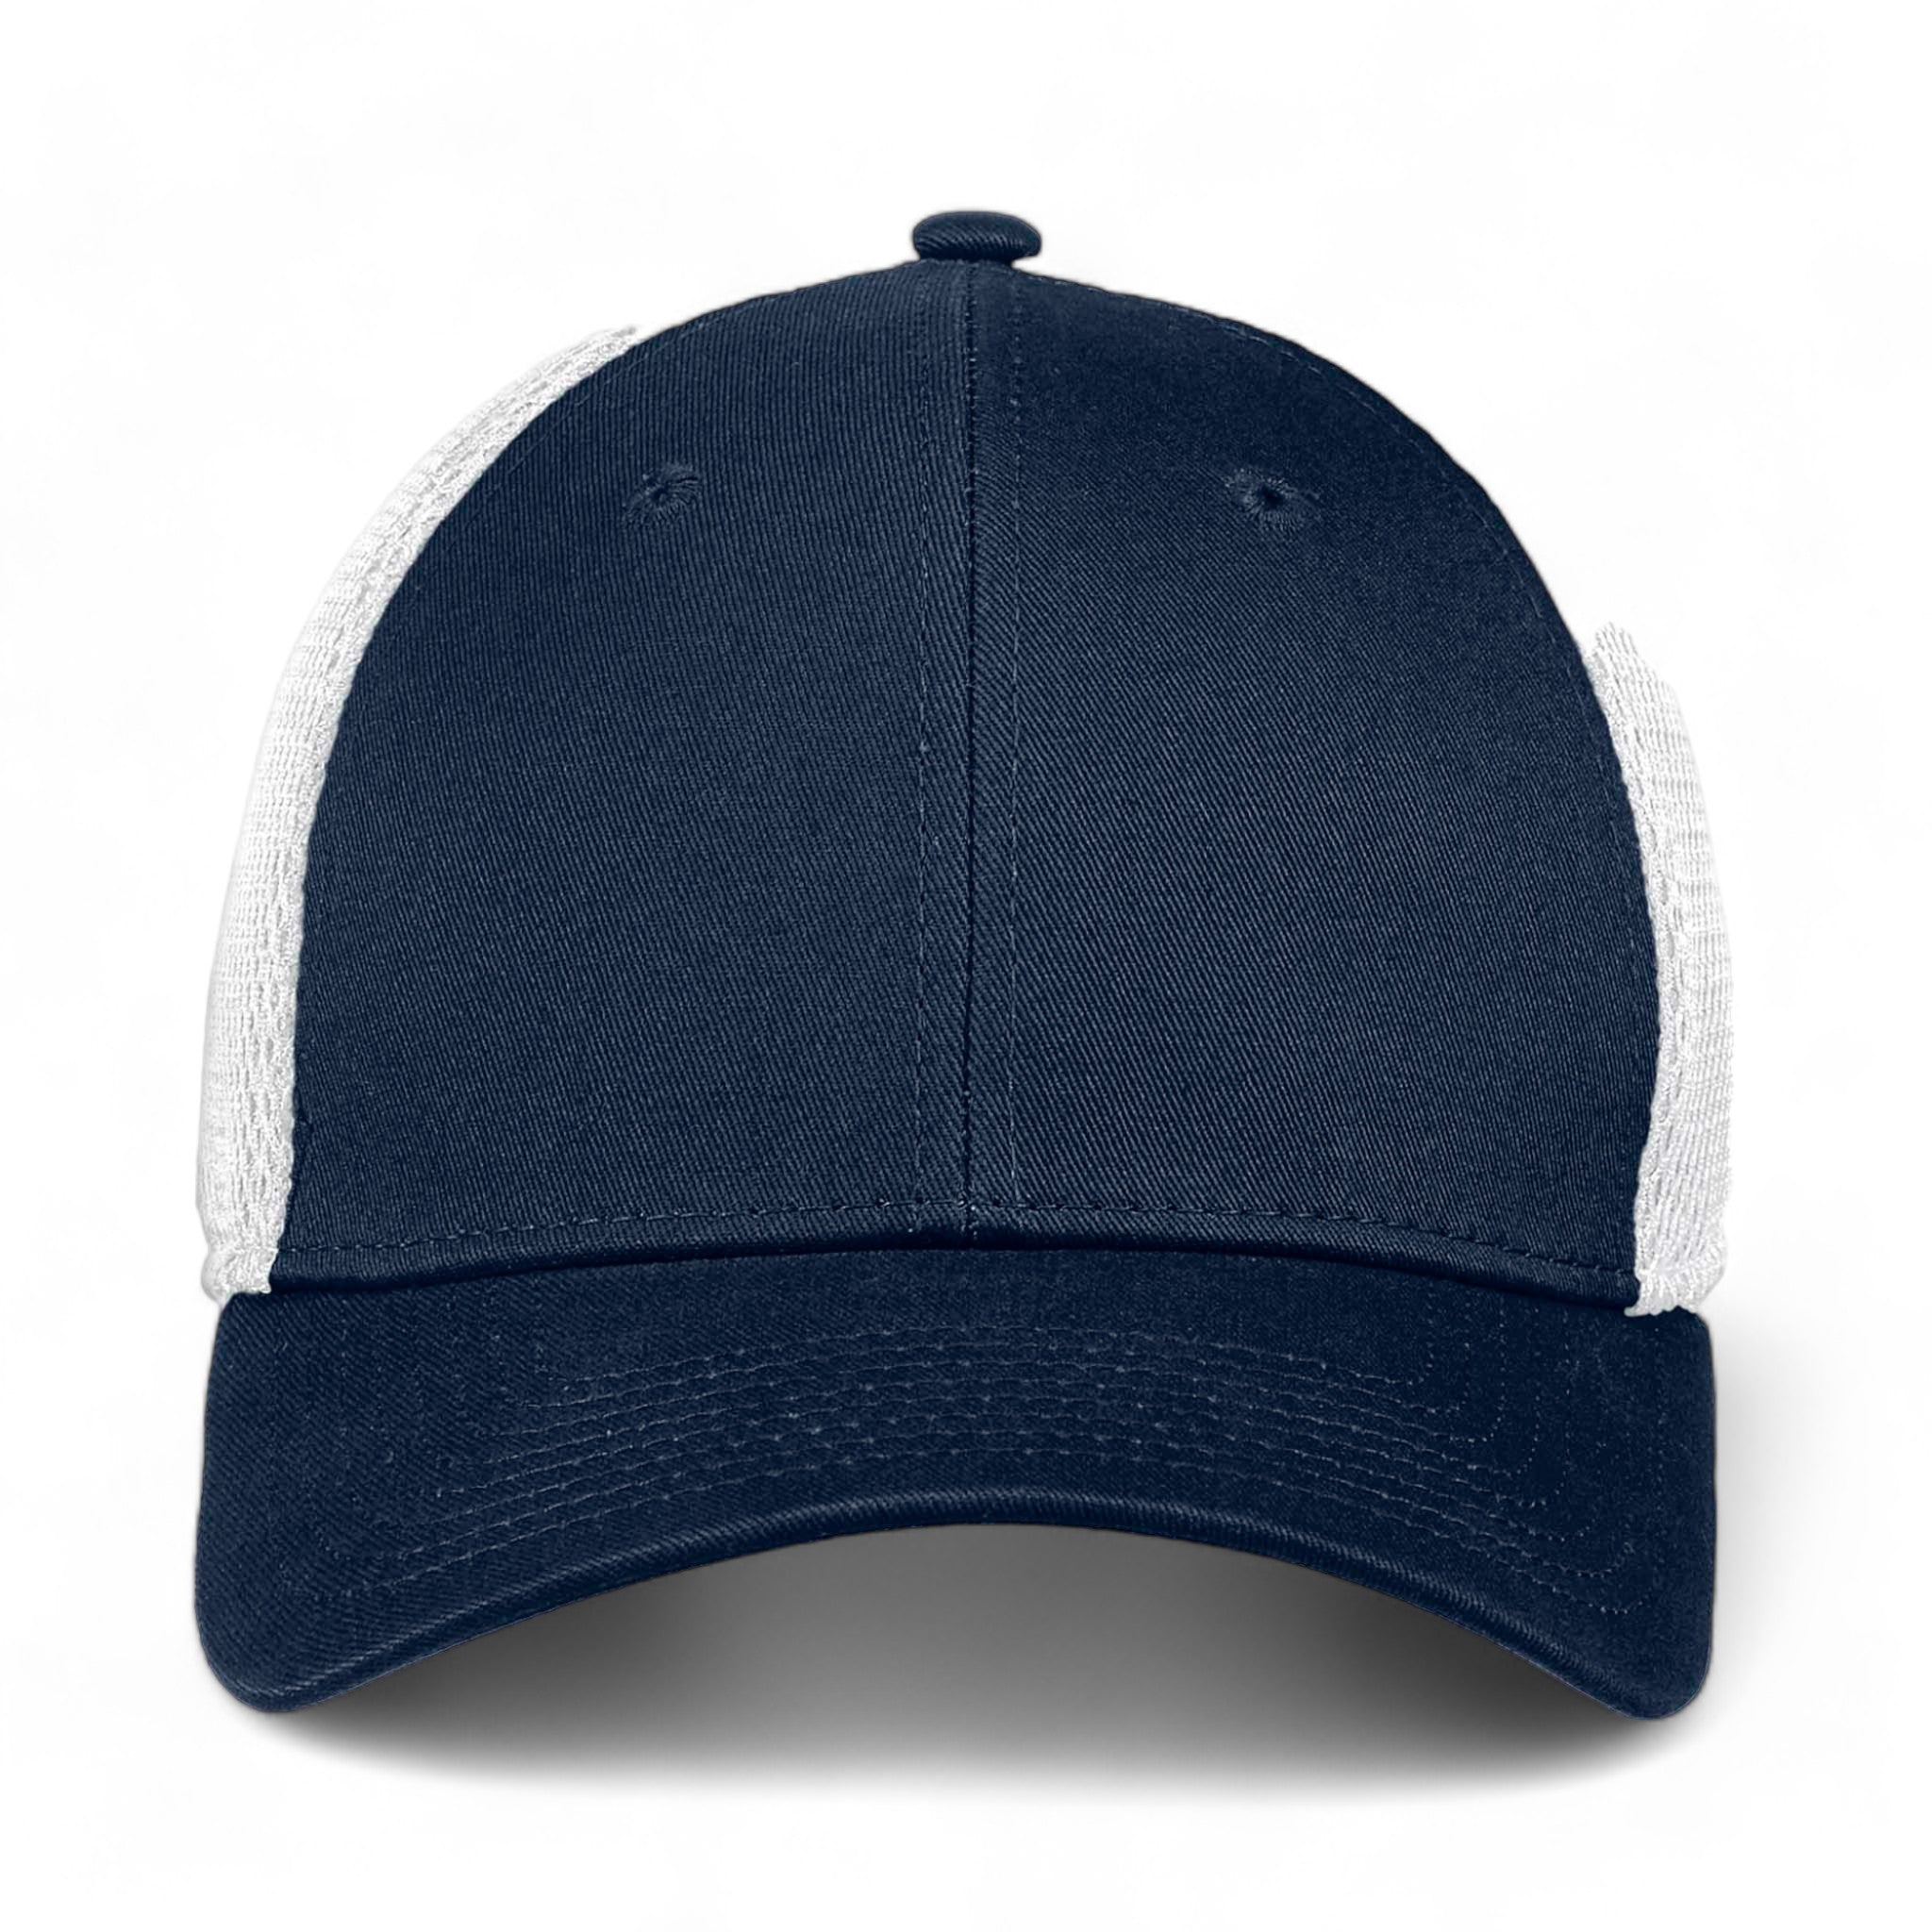 Front view of New Era NE1020 custom hat in deep navy and white